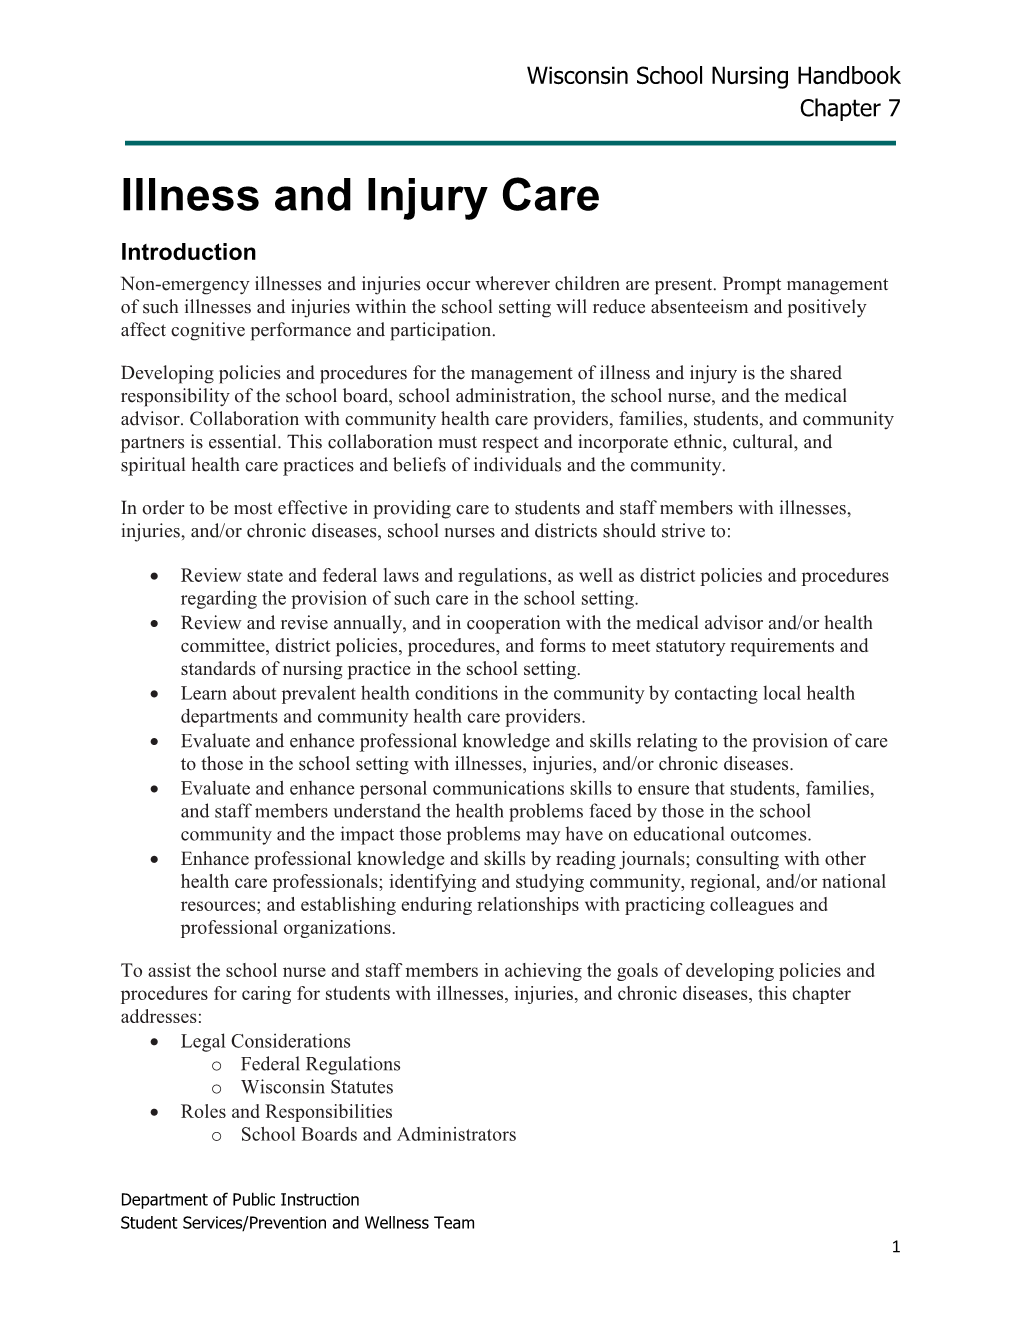 Chapter 7: Illness and Injury Care